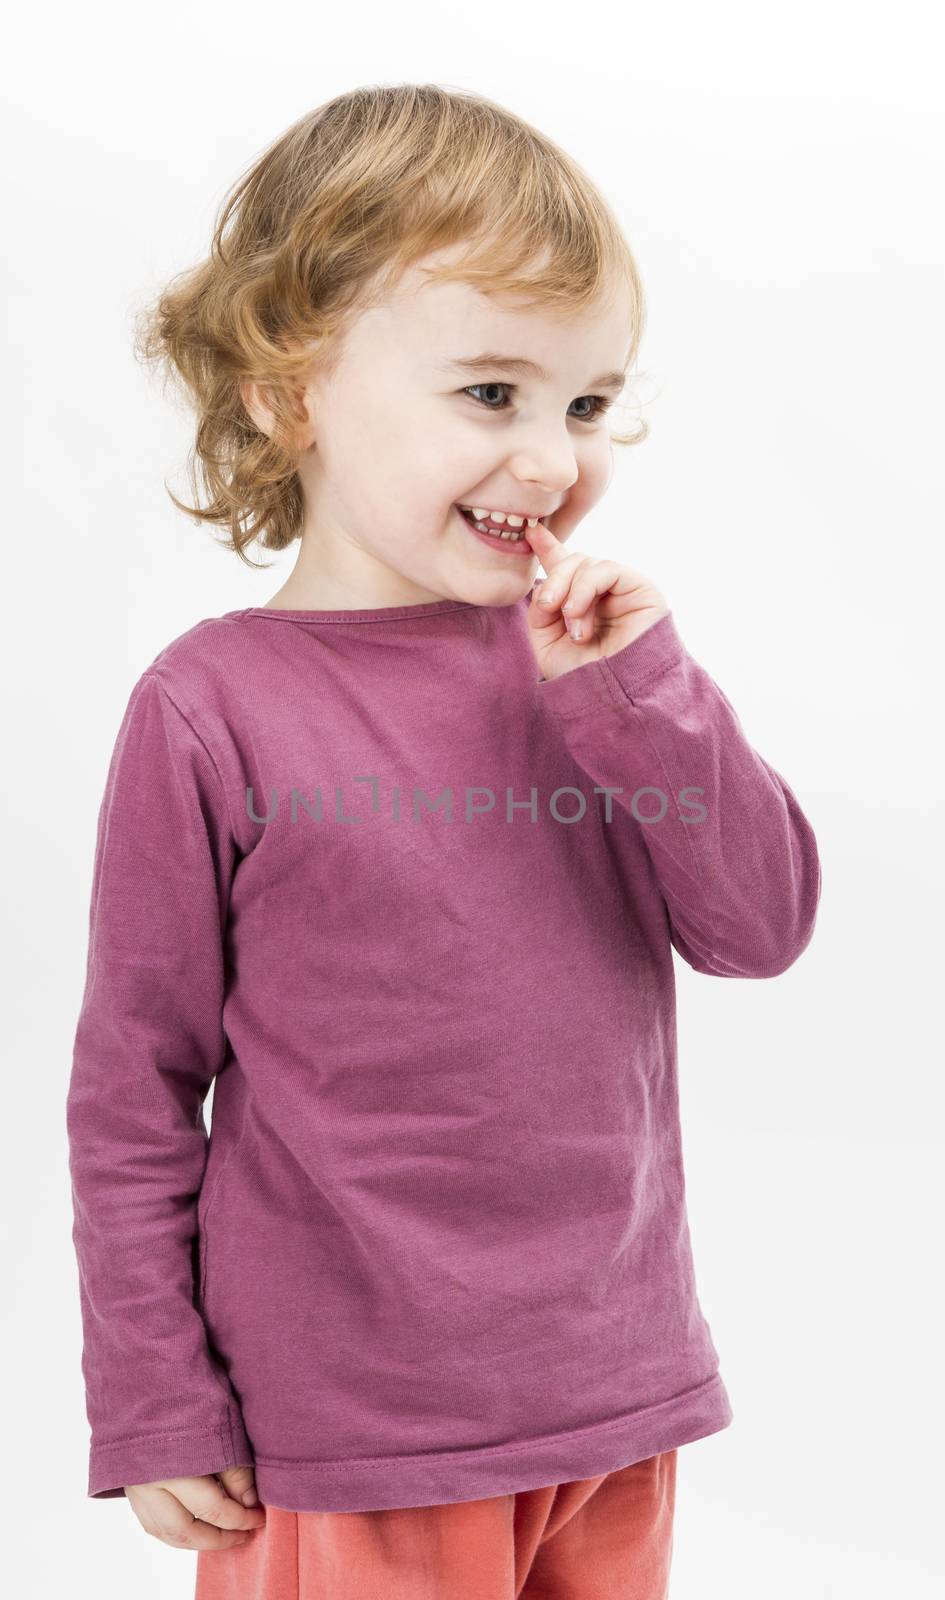 abashed young girl in light grey background by gewoldi